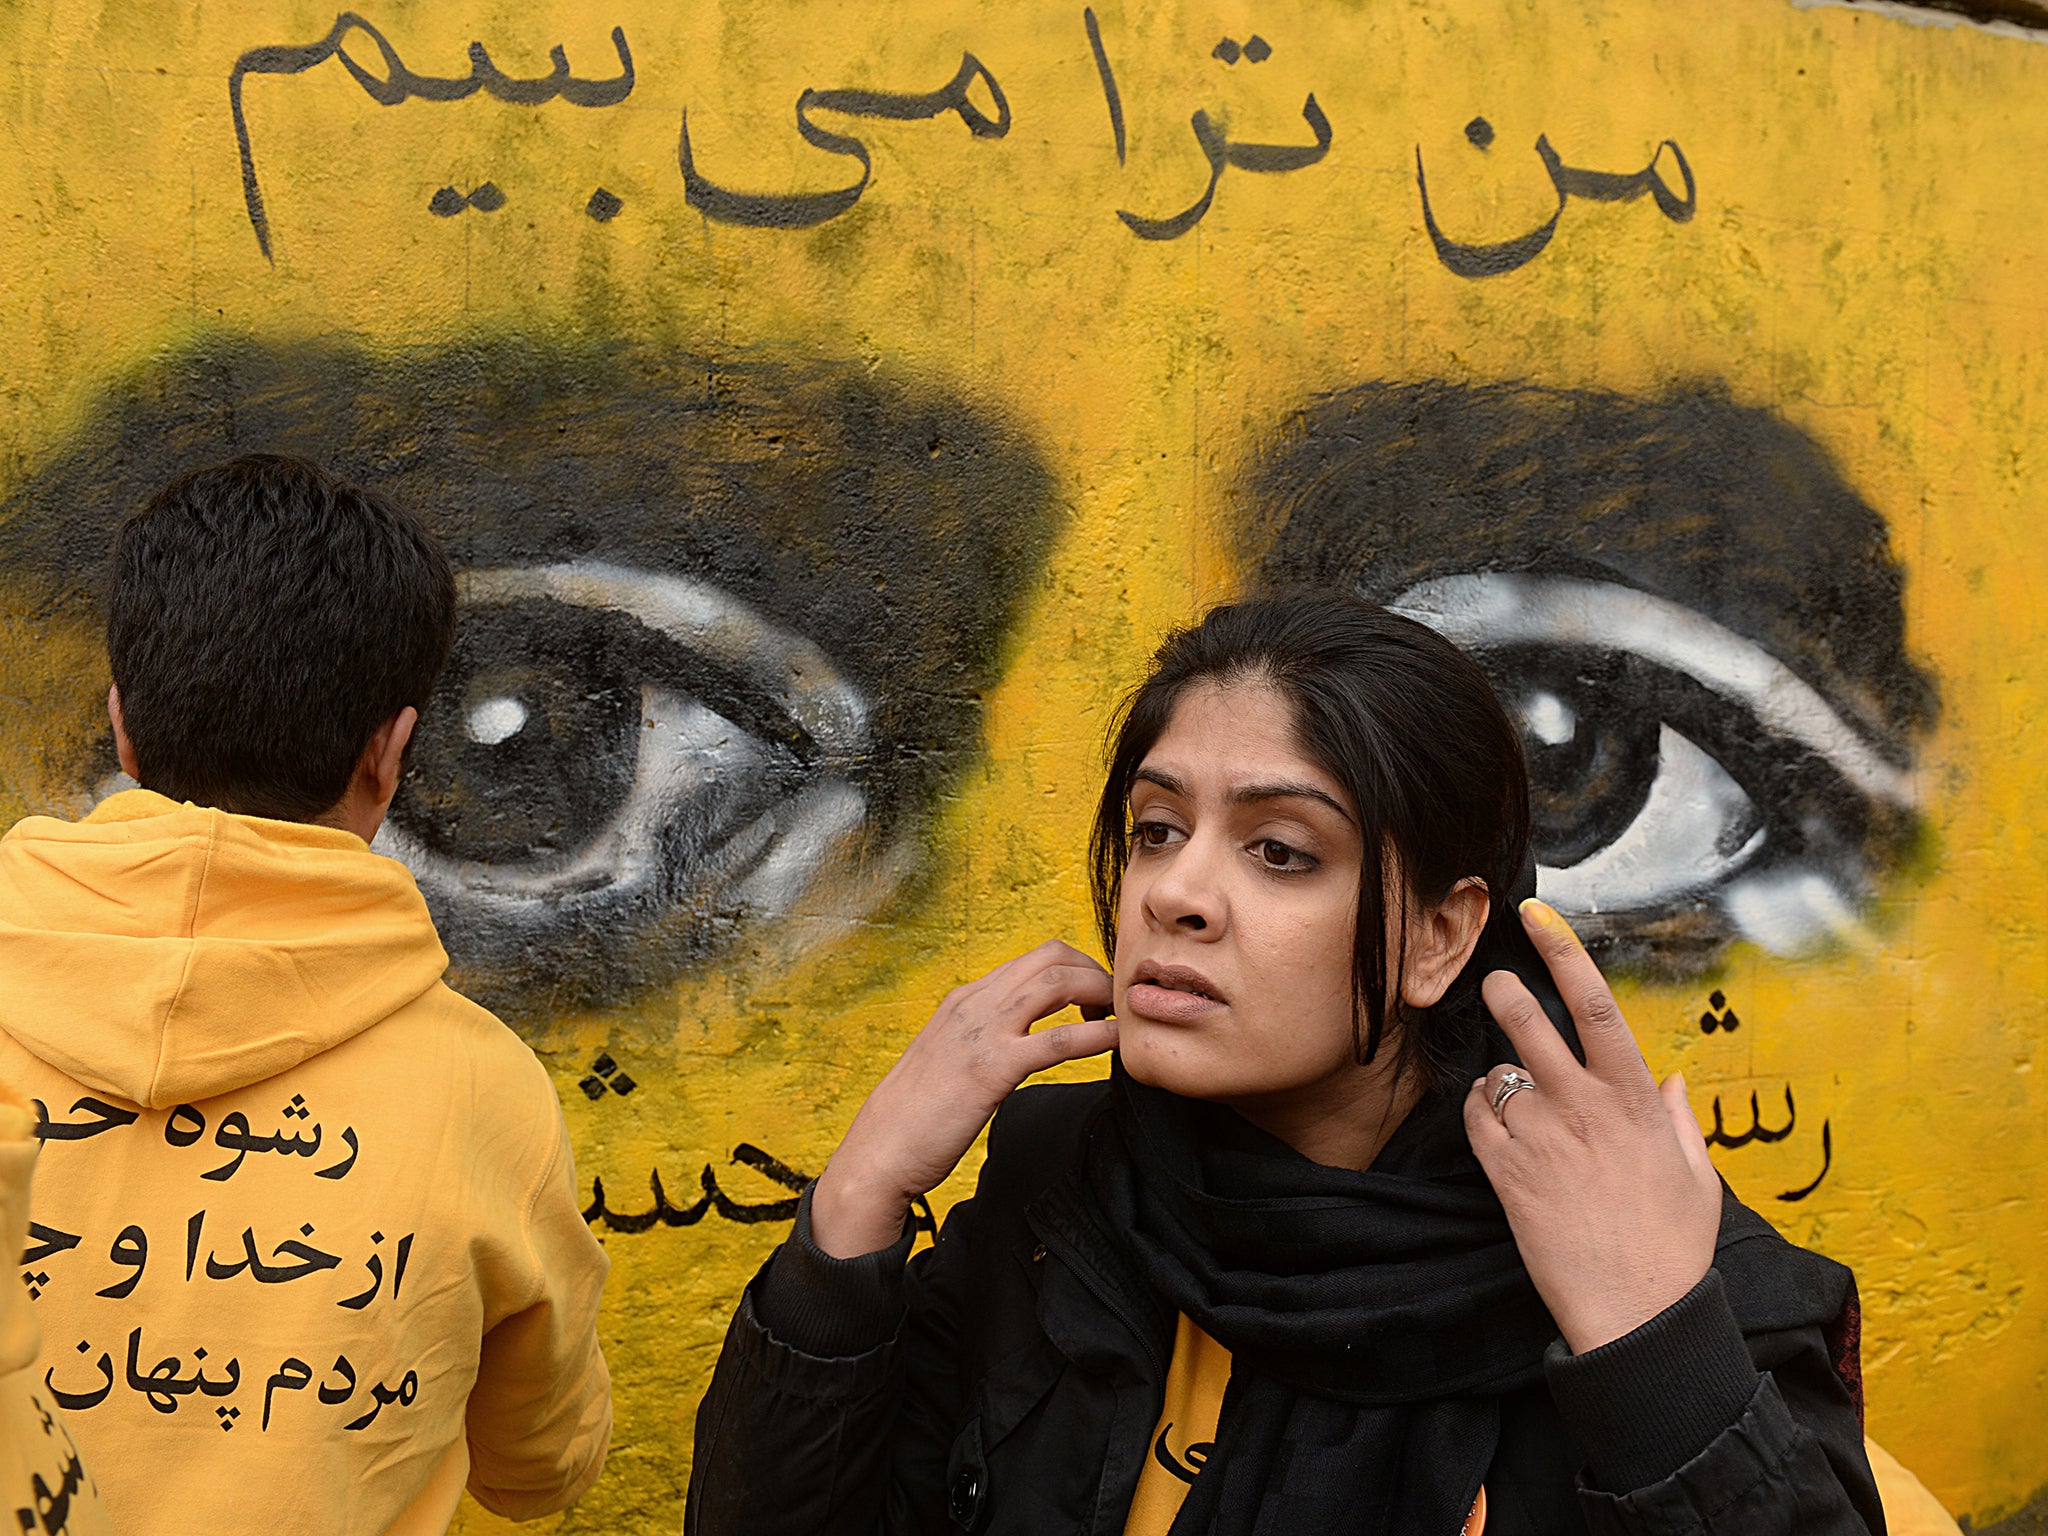 Shamsia Hassani (26) works on a street mural during an event to mark International Women's Day in Kabul